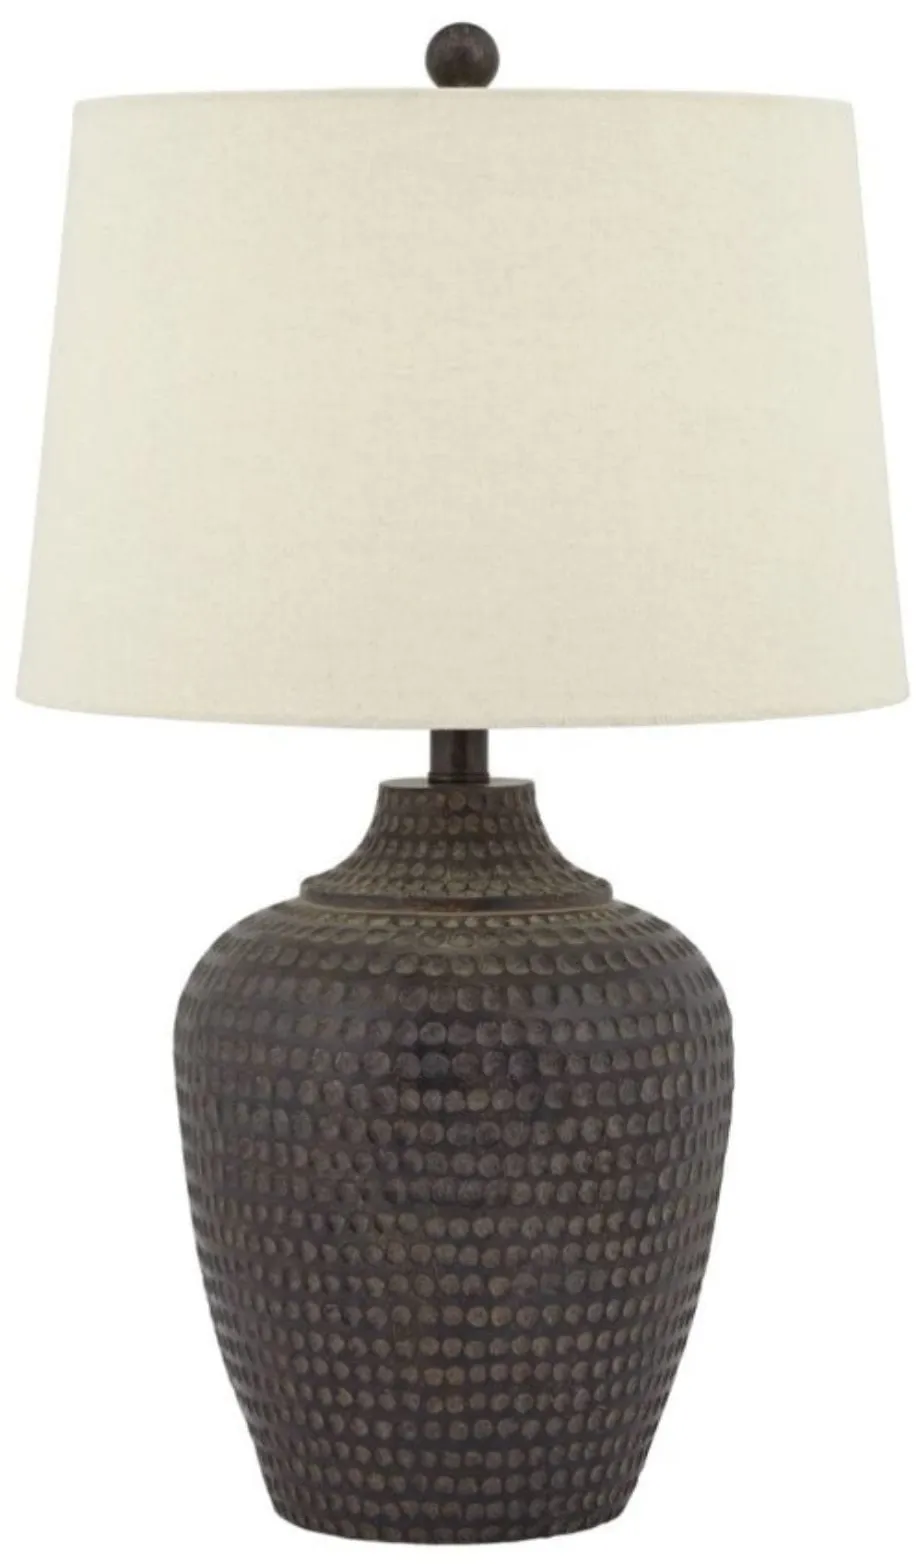 Brown Faux Wood Hammered Look Table Lamp 25.5"H